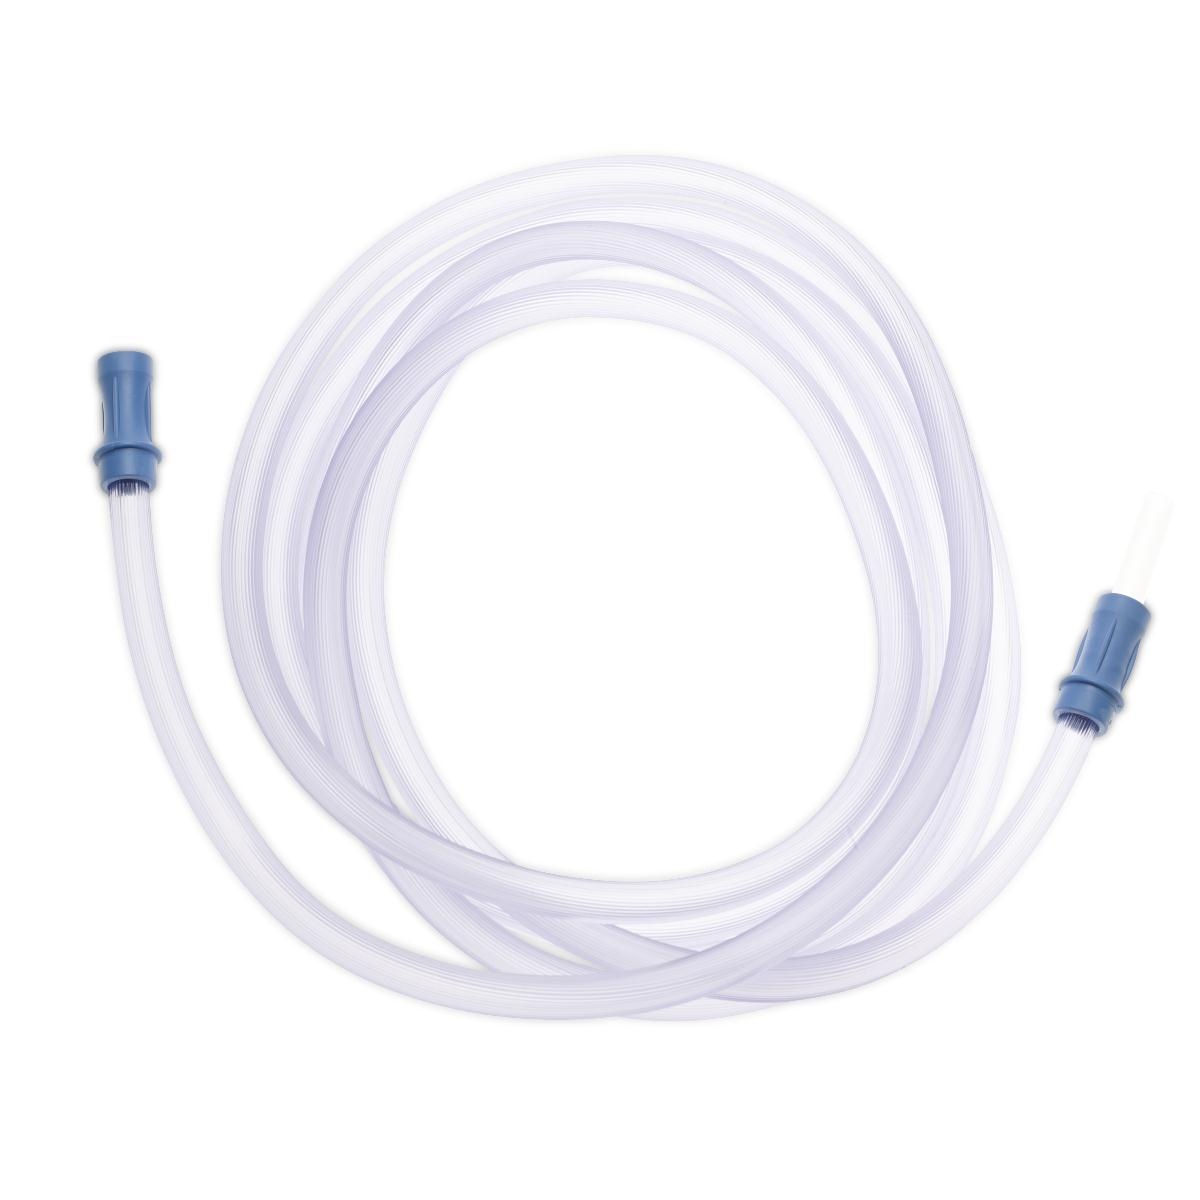 Medline Suction Tubing STERILE Non-Conductive 6mm x 3m - EACH image 0